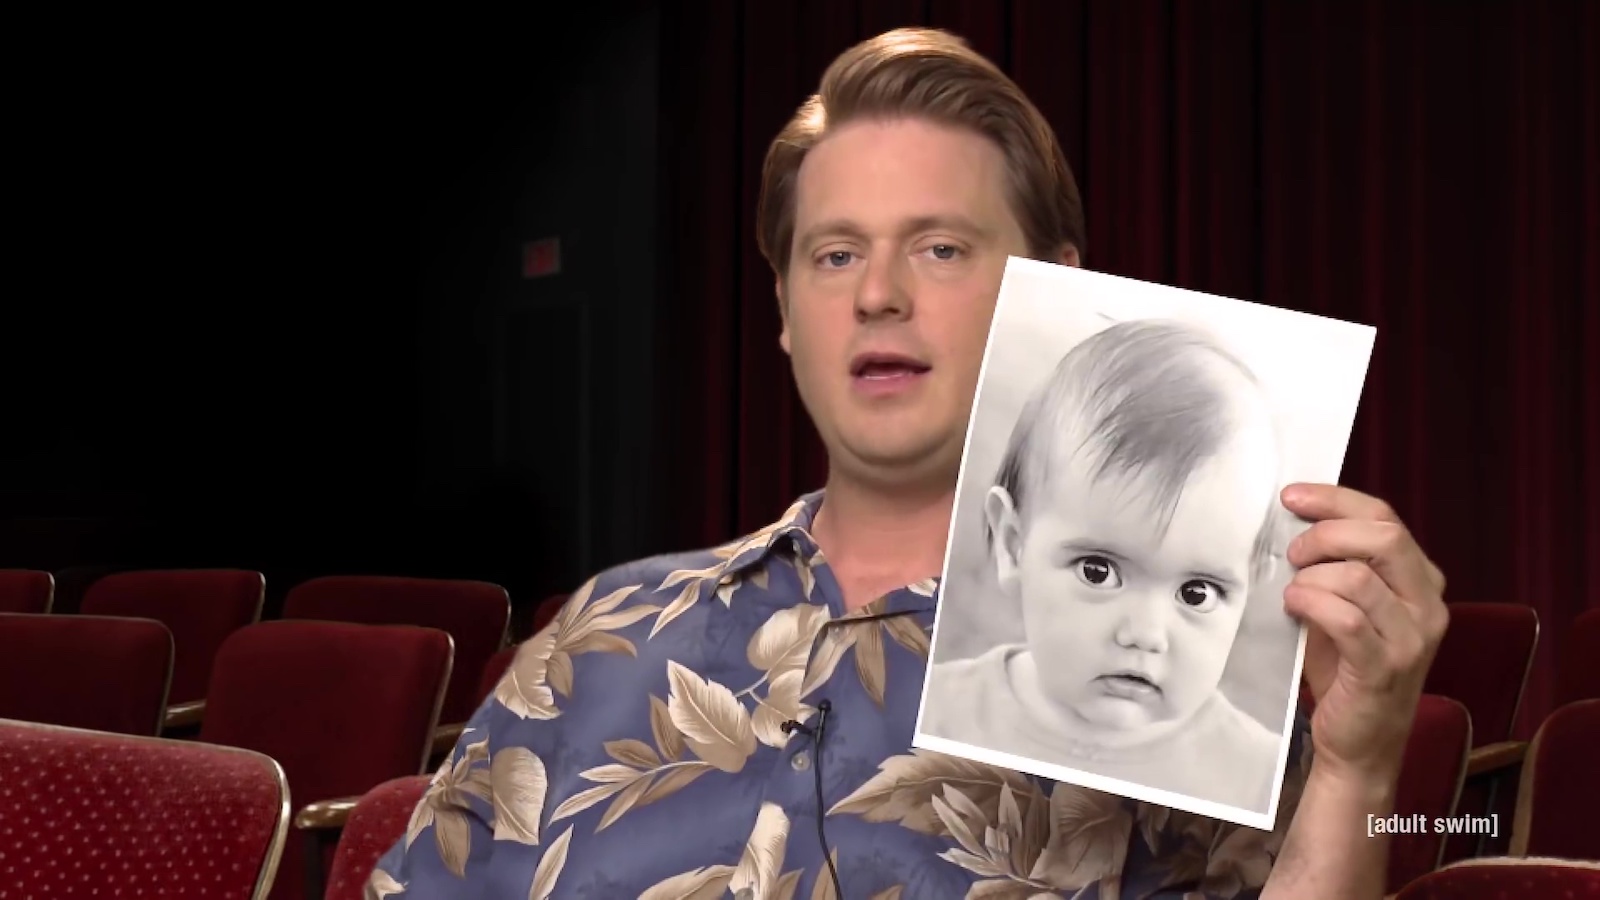 A man holds up a picture of a baby while talking to camera